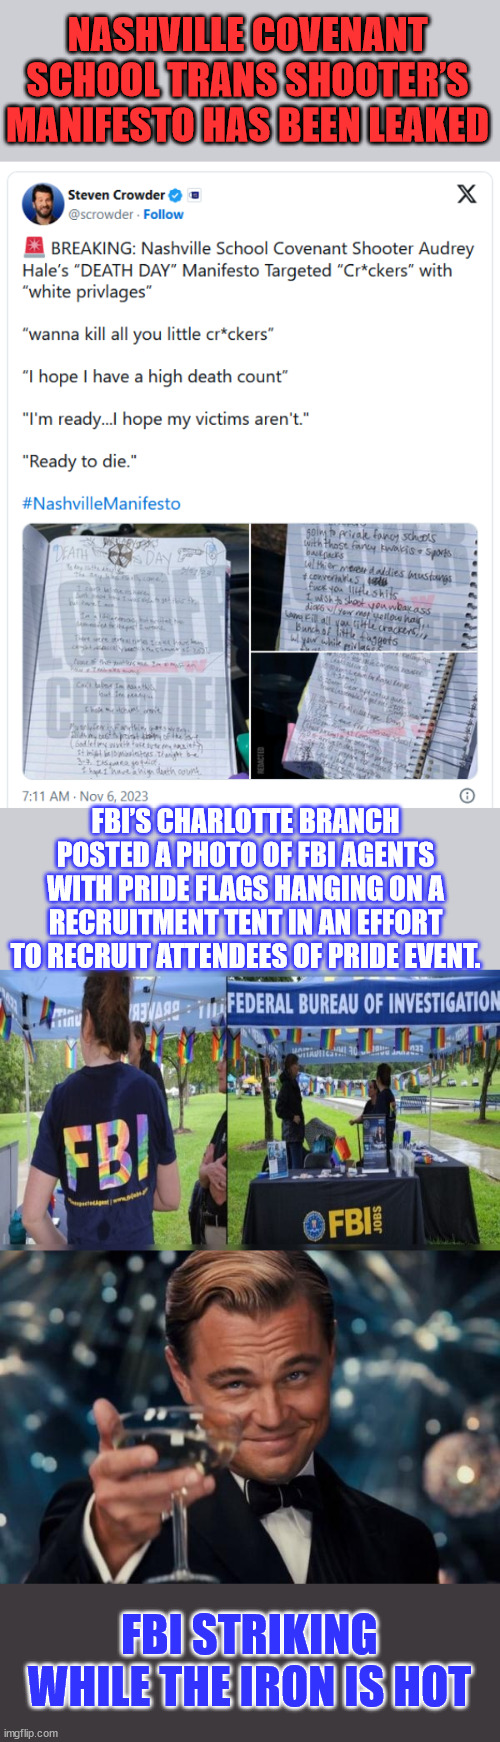 They always have a reason for leaking... | NASHVILLE COVENANT SCHOOL TRANS SHOOTER’S MANIFESTO HAS BEEN LEAKED; FBI’S CHARLOTTE BRANCH POSTED A PHOTO OF FBI AGENTS WITH PRIDE FLAGS HANGING ON A RECRUITMENT TENT IN AN EFFORT TO RECRUIT ATTENDEES OF PRIDE EVENT. FBI STRIKING WHILE THE IRON IS HOT | image tagged in memes,leonardo dicaprio cheers,fbi,love,lgbtq,racists | made w/ Imgflip meme maker